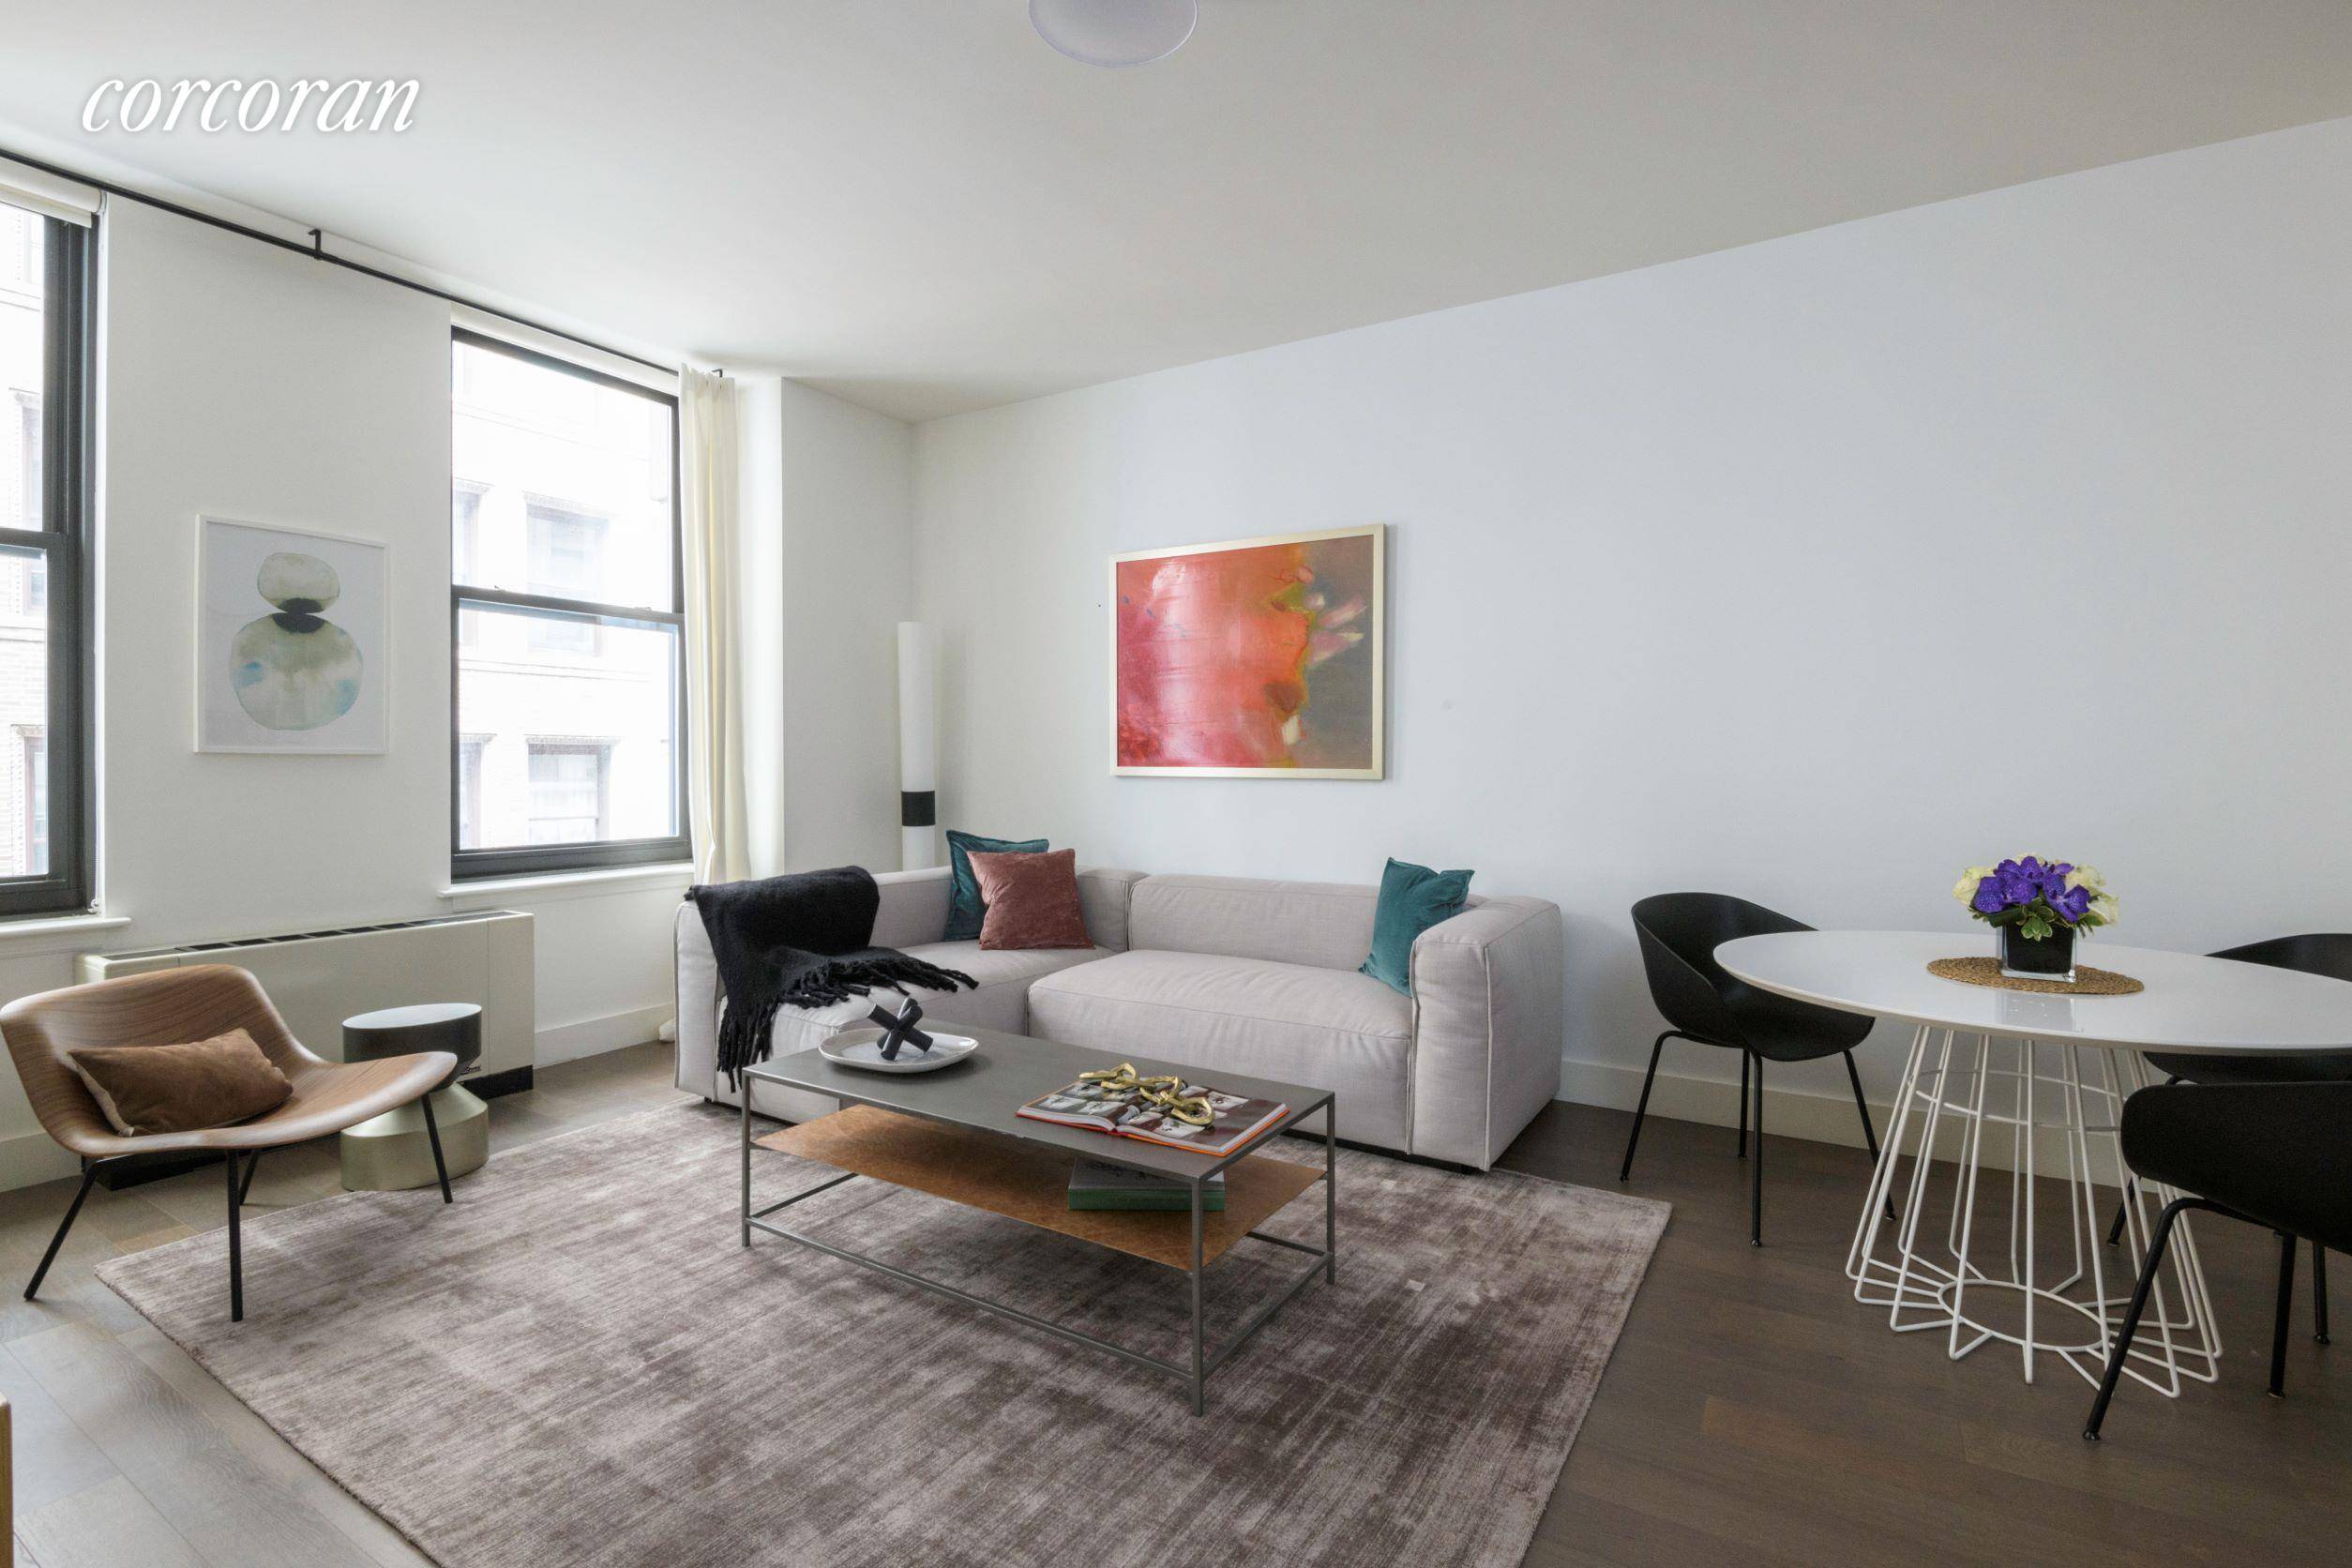 IMMEDIATE OCCUPANCY. Welcome to the Broad Exchange Building, where the timeless grandeur of New York's storied past meets spacious, sophisticated, and modern residences that are ideal for contemporary living.